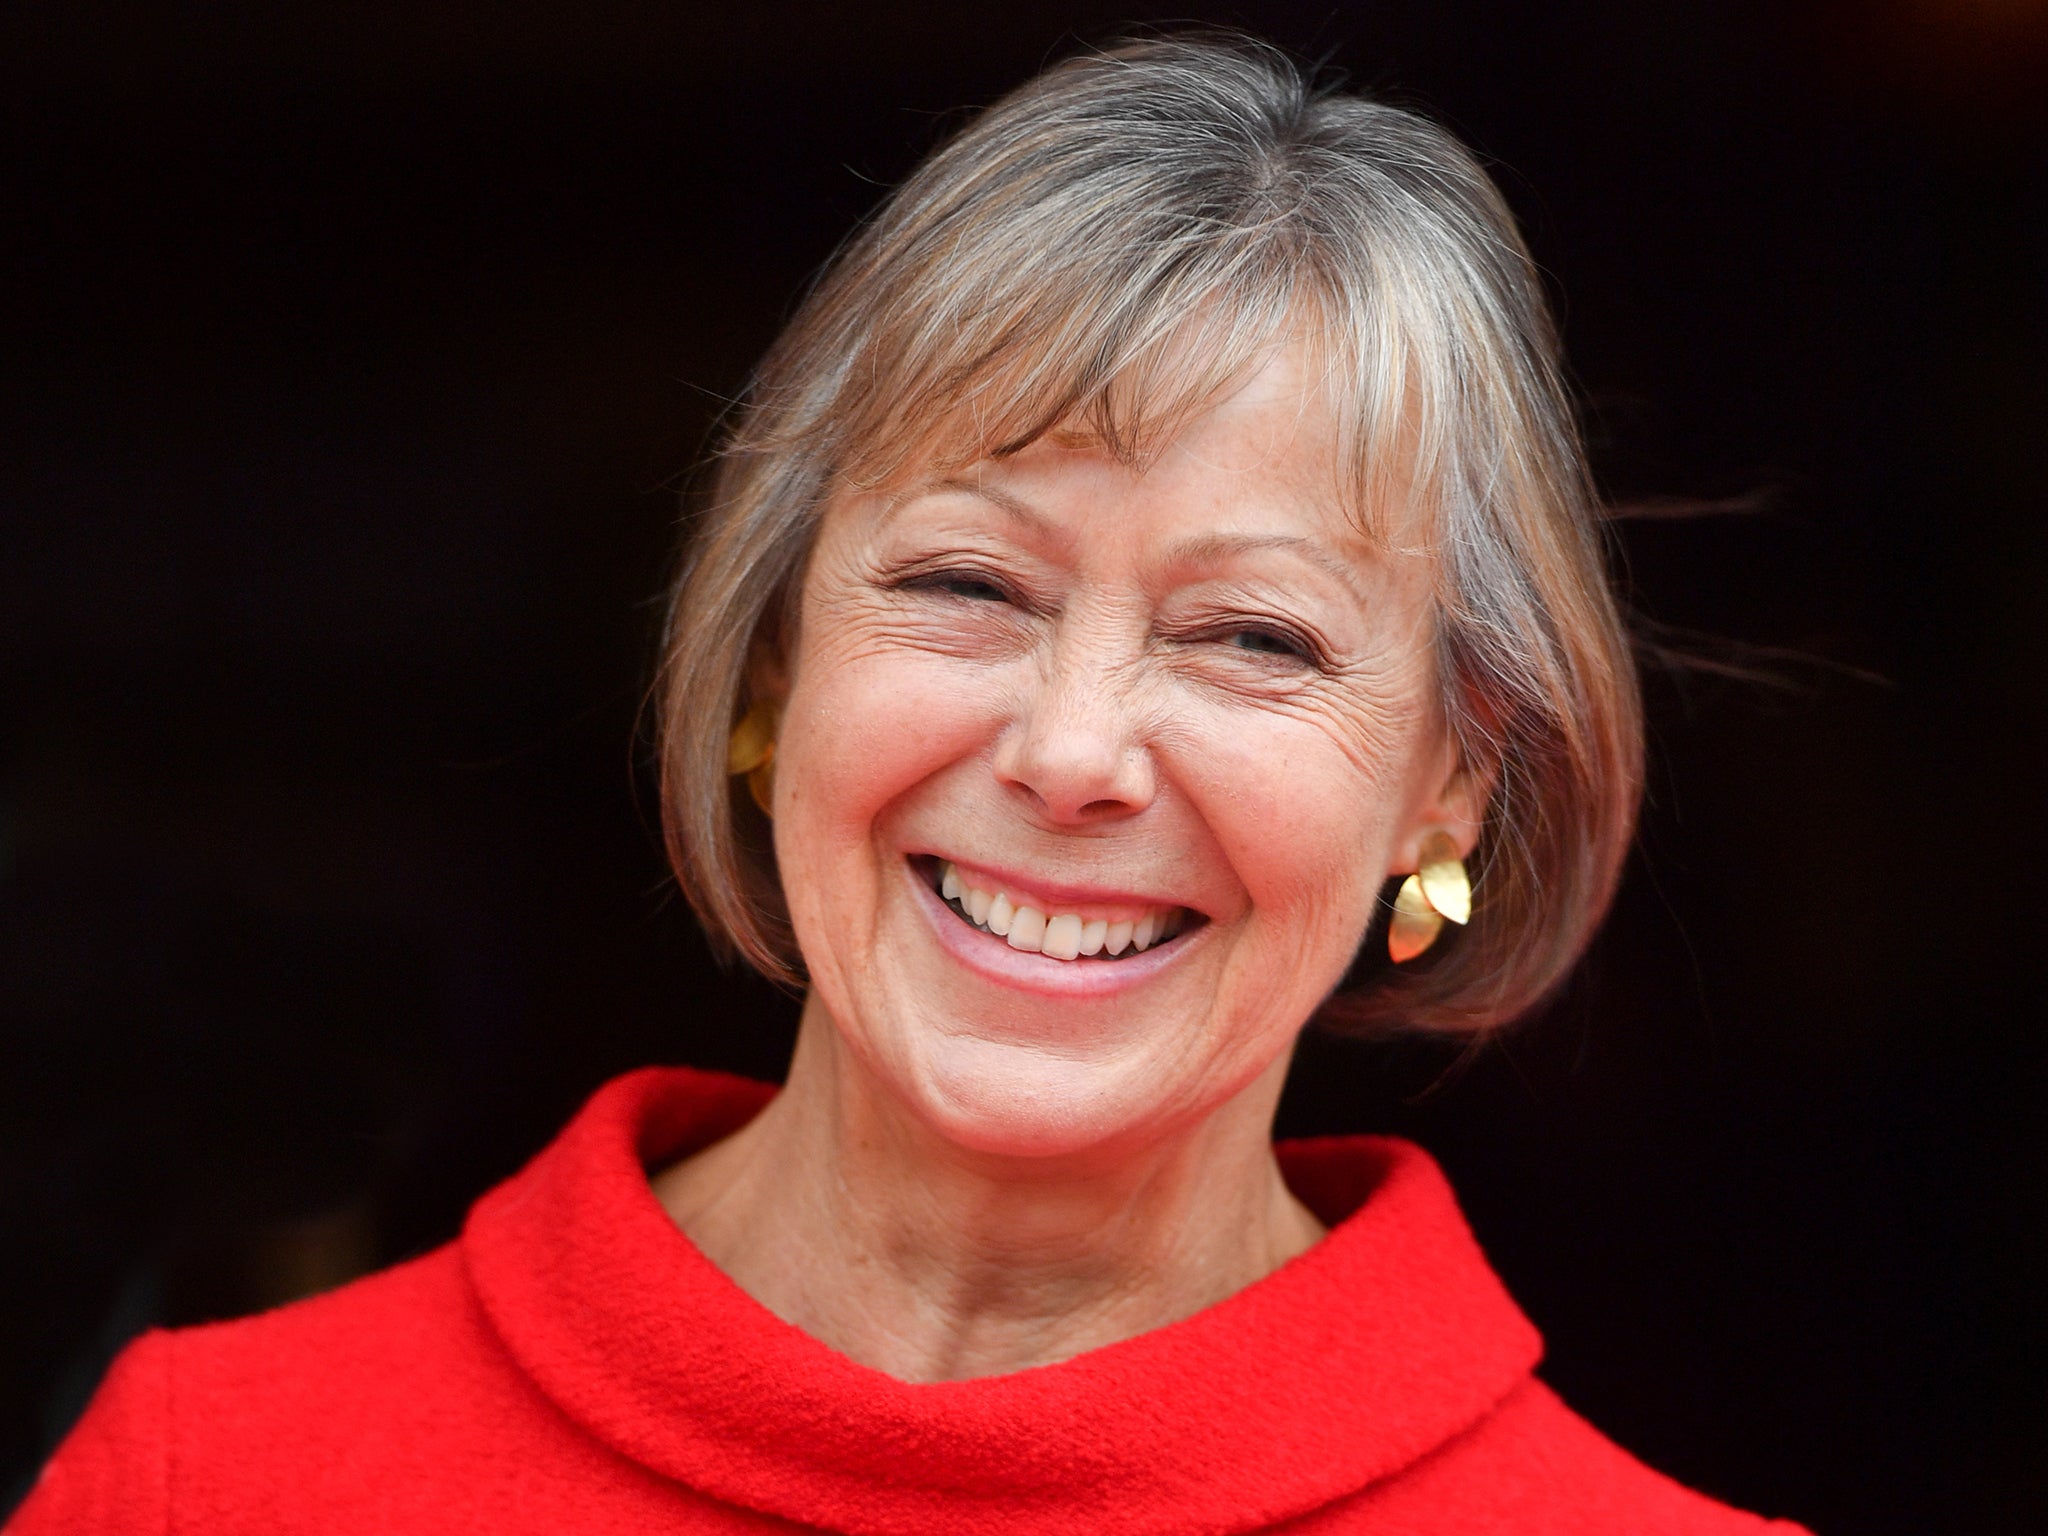 Jenny Agutter interview: 'I was a 16-year-old and I felt very uncomfortable  about being naked' | The Independent